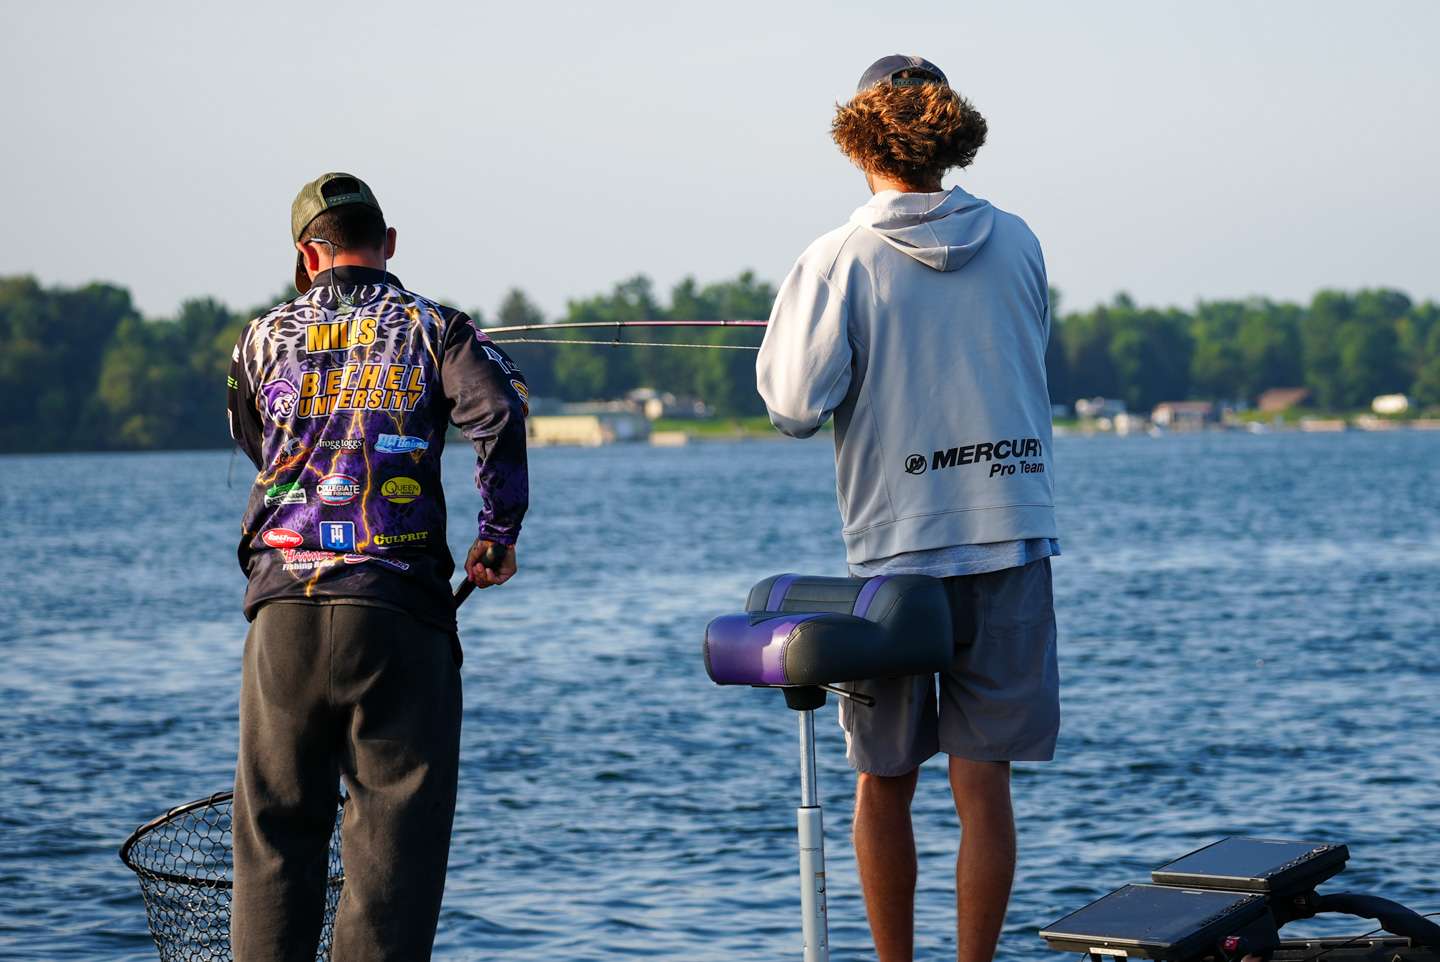 Find out how the Day 1 leaders fared Friday at the Carhartt Bassmaster College Series National Championship presented by Bass Pro Shops.